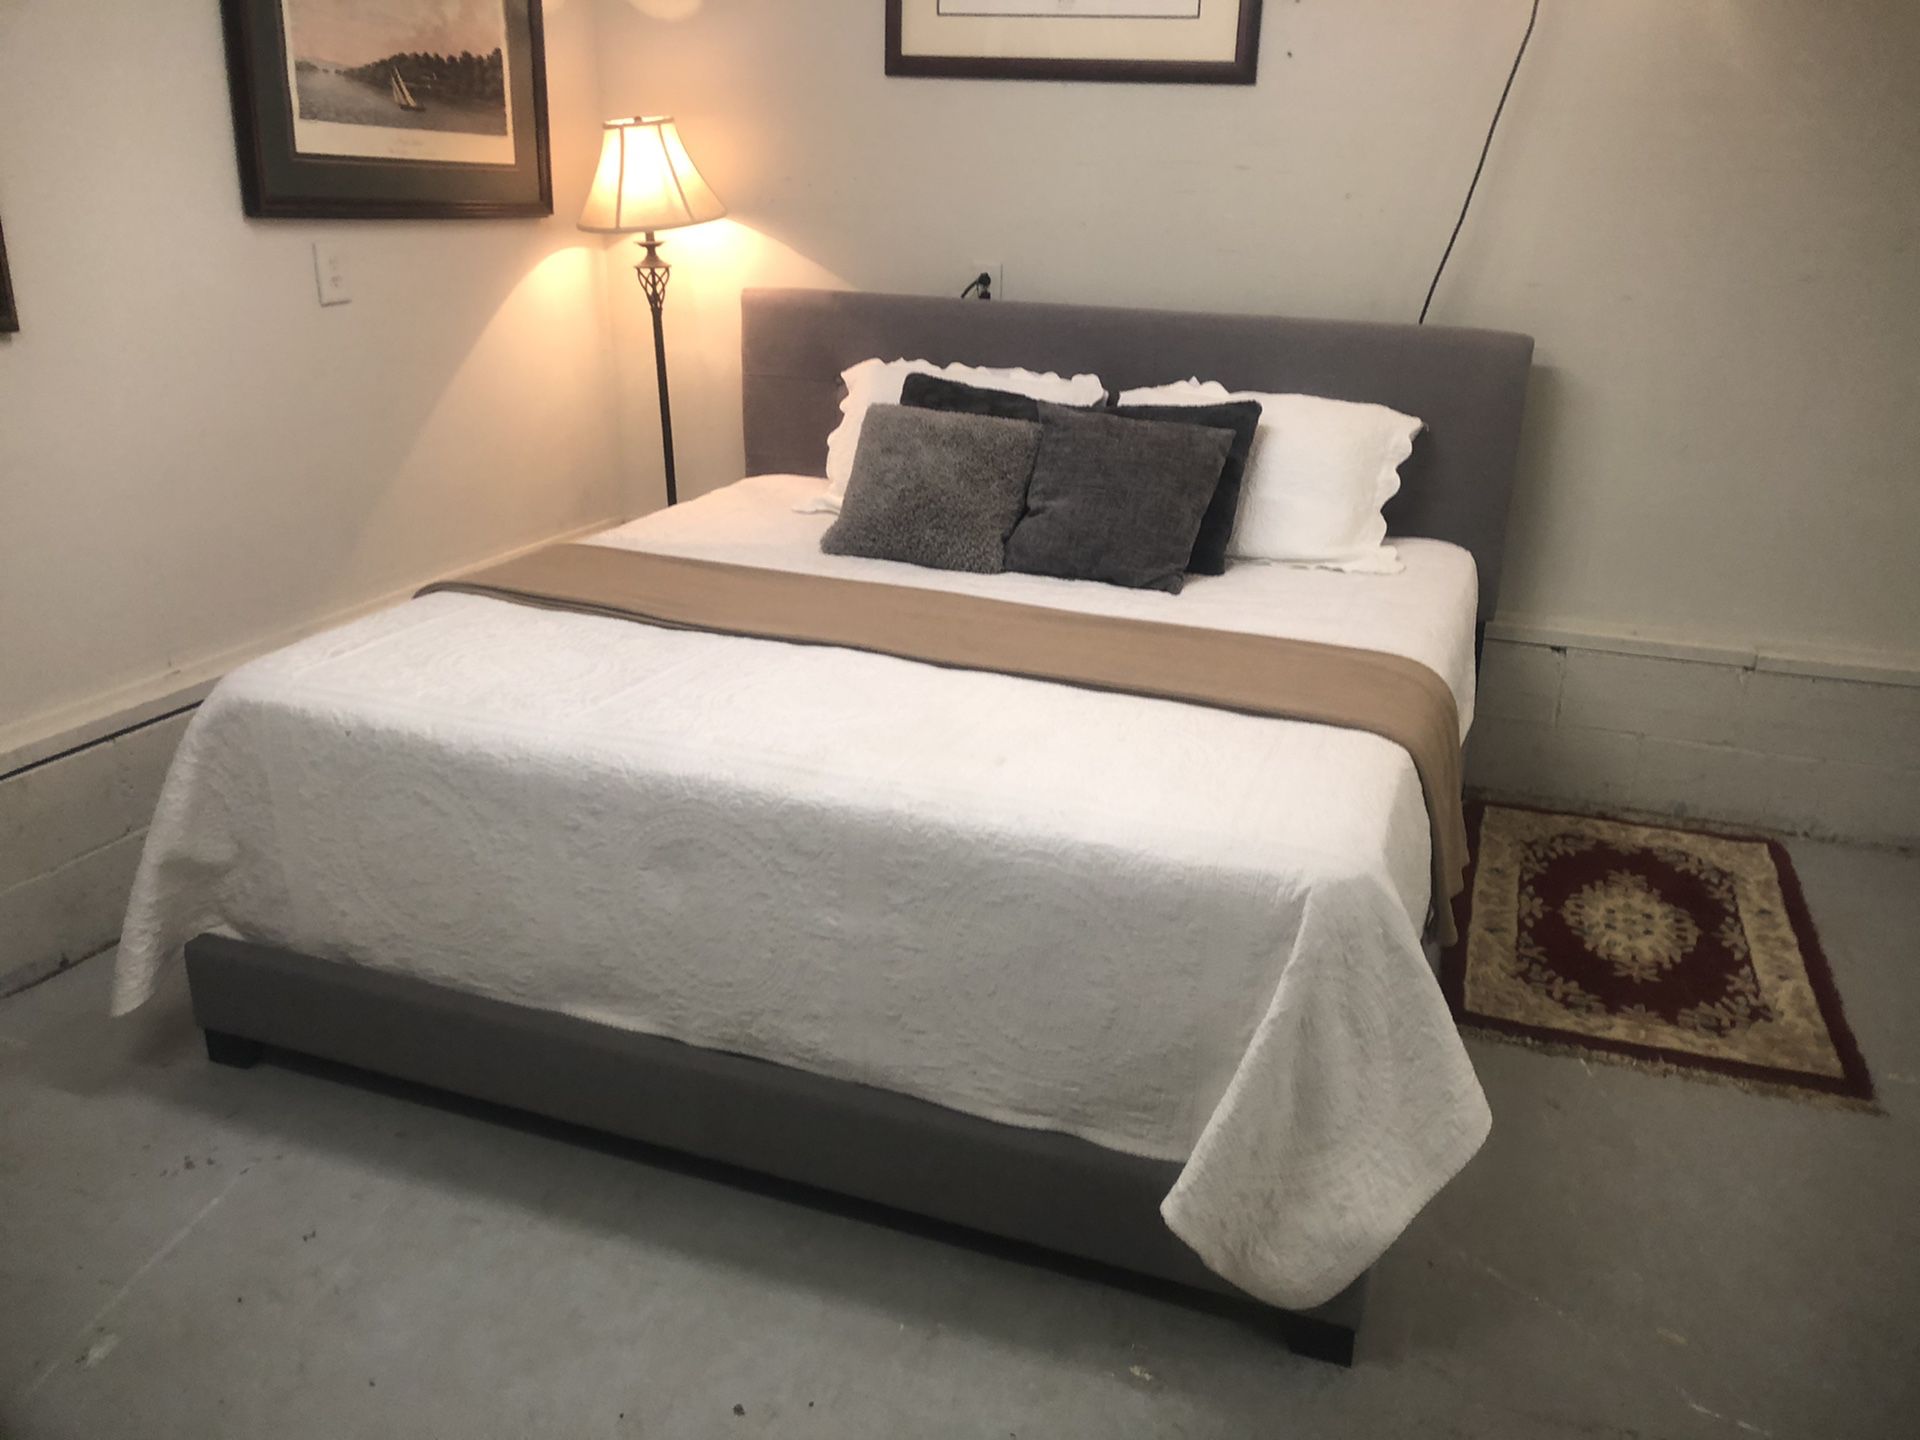 Tufted king size bed with mattress and box spring